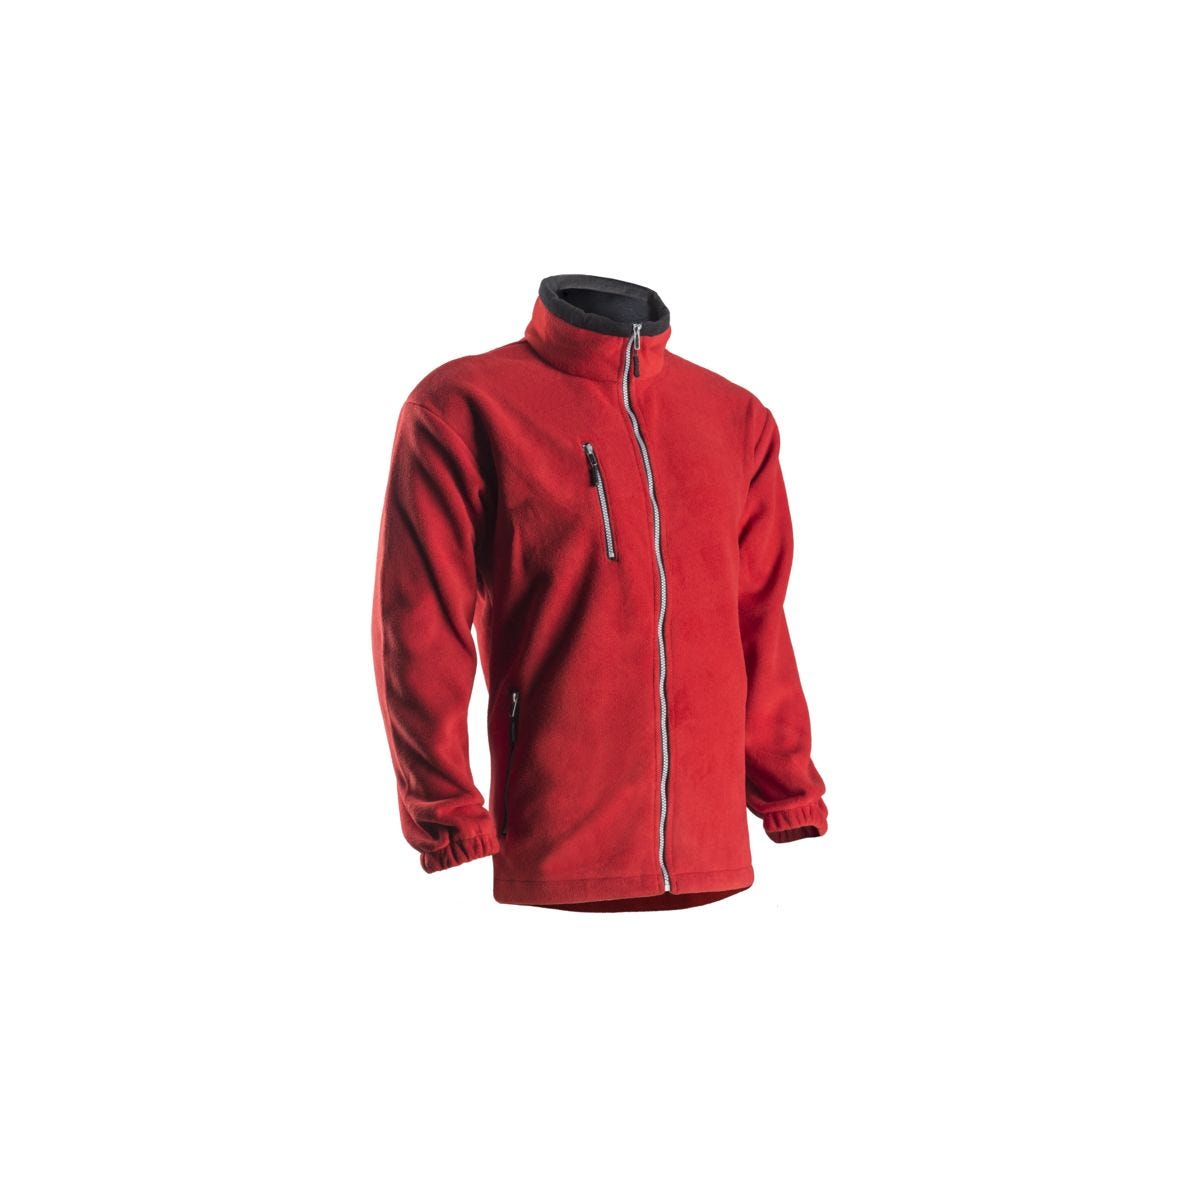 Veste polaire Angara rouge - Coverguard - Taille 2XL 0